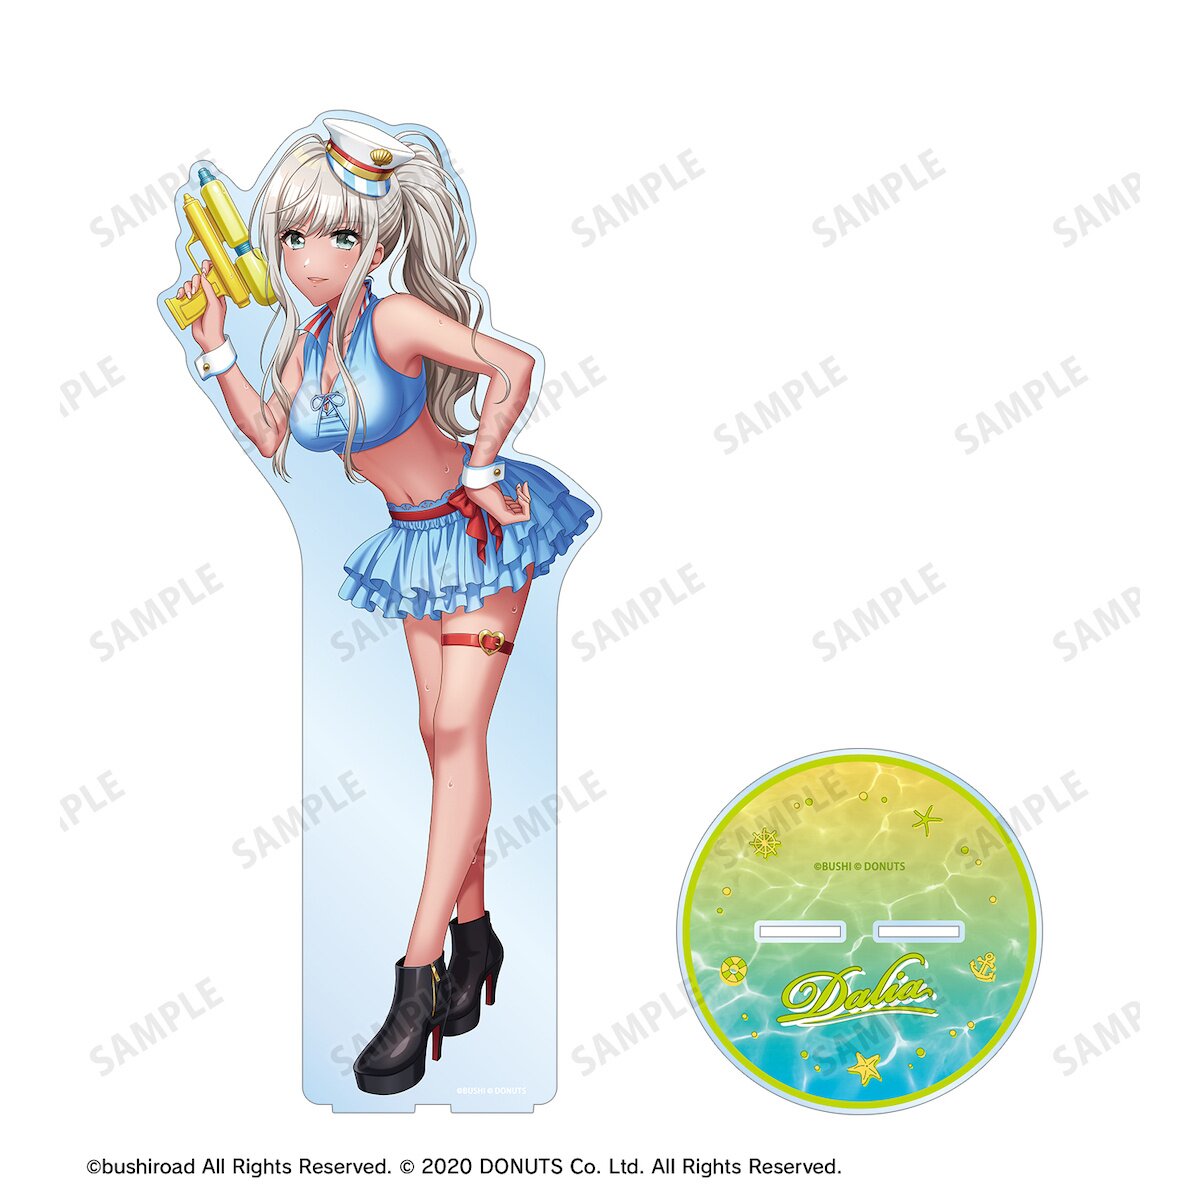 D4DJ Groovy Mix: Marine Sailor Ver. Large Acrylic Stand Collection